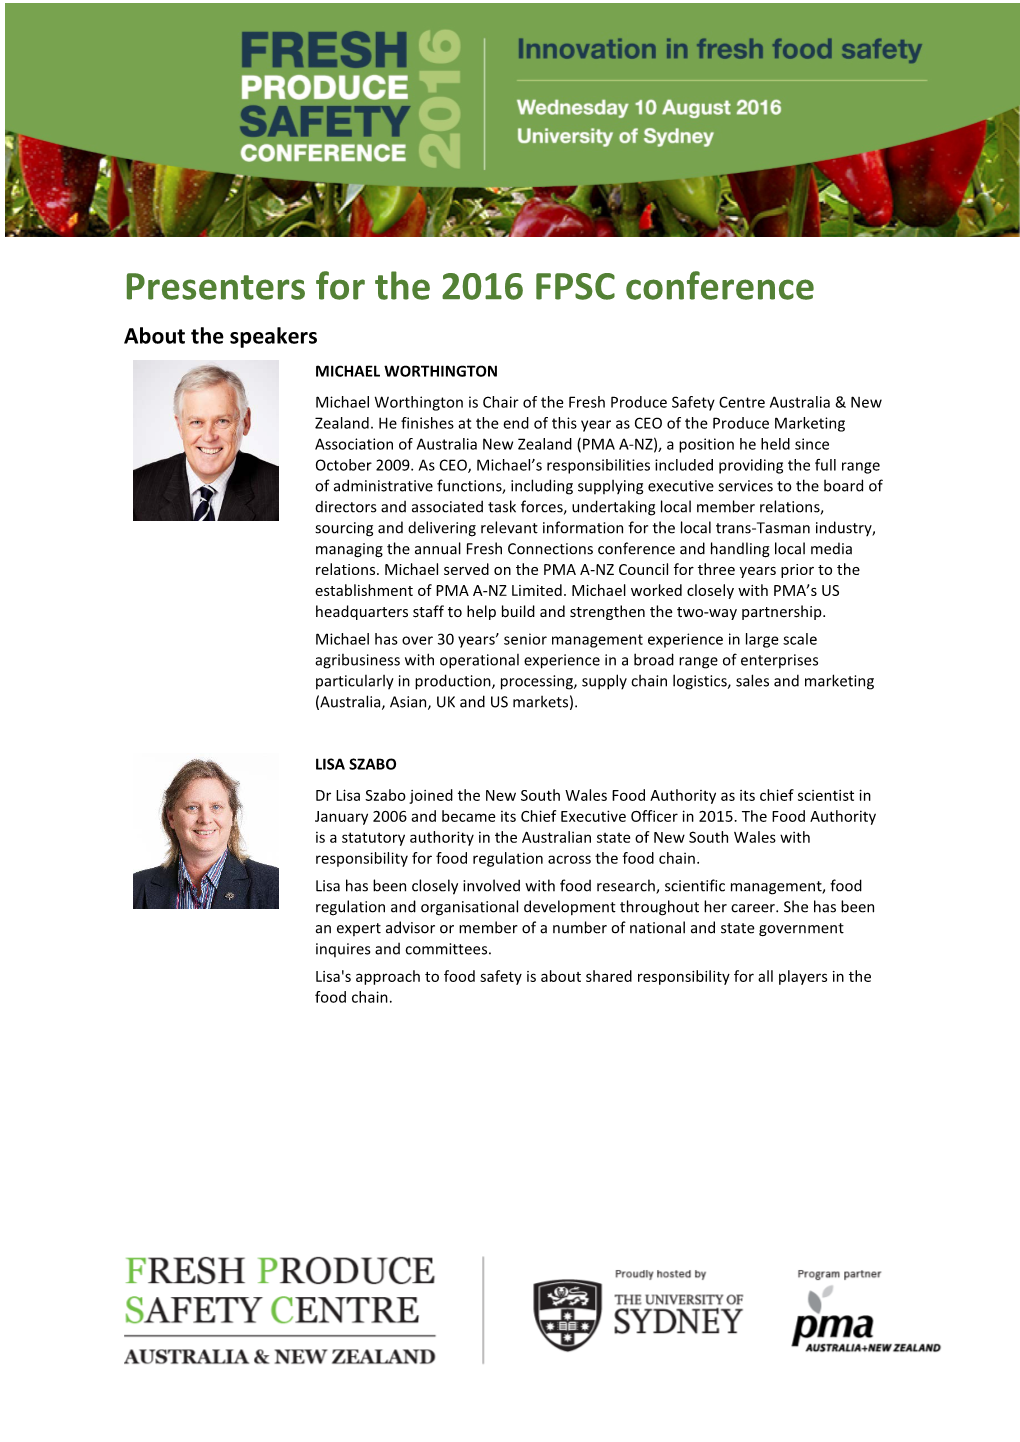 Presenters for the 2016 FPSC Conference About the Speakers MICHAEL WORTHINGTON Michael Worthington Is Chair of the Fresh Produce Safety Centre Australia & New Zealand